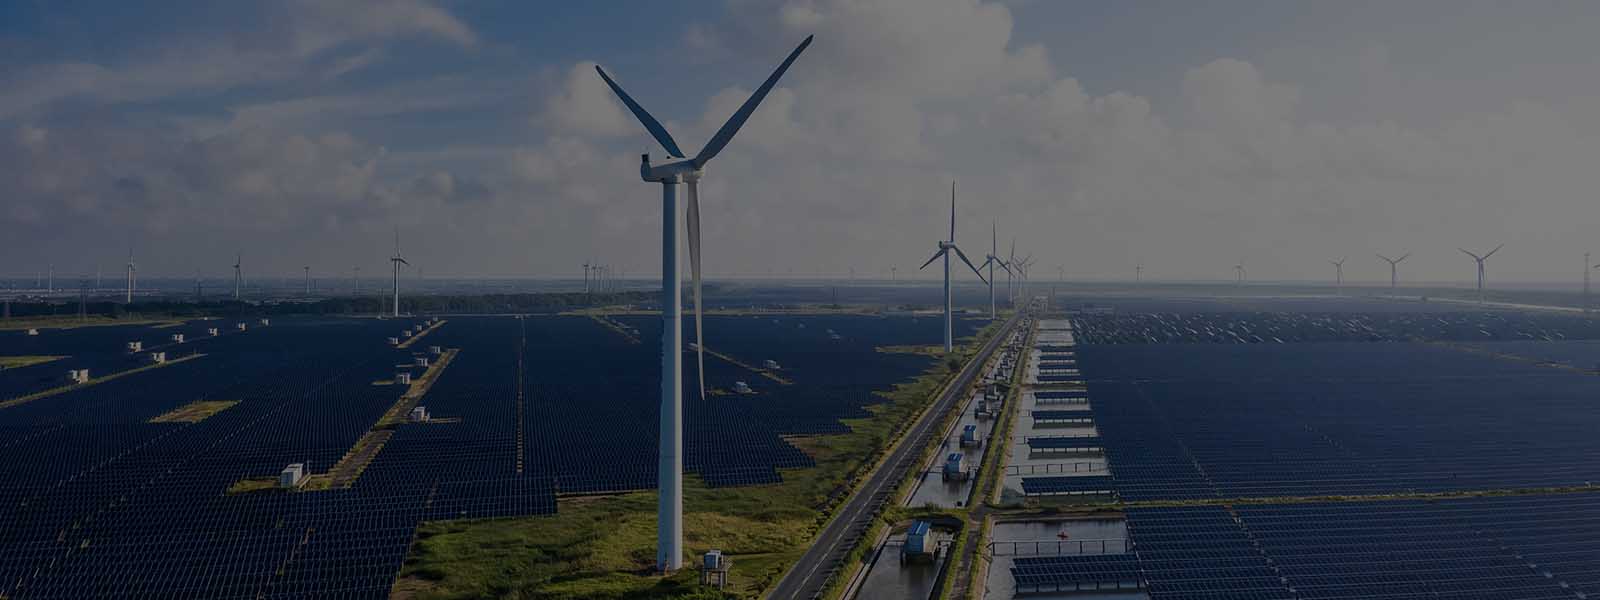 Asia’s Green Transition